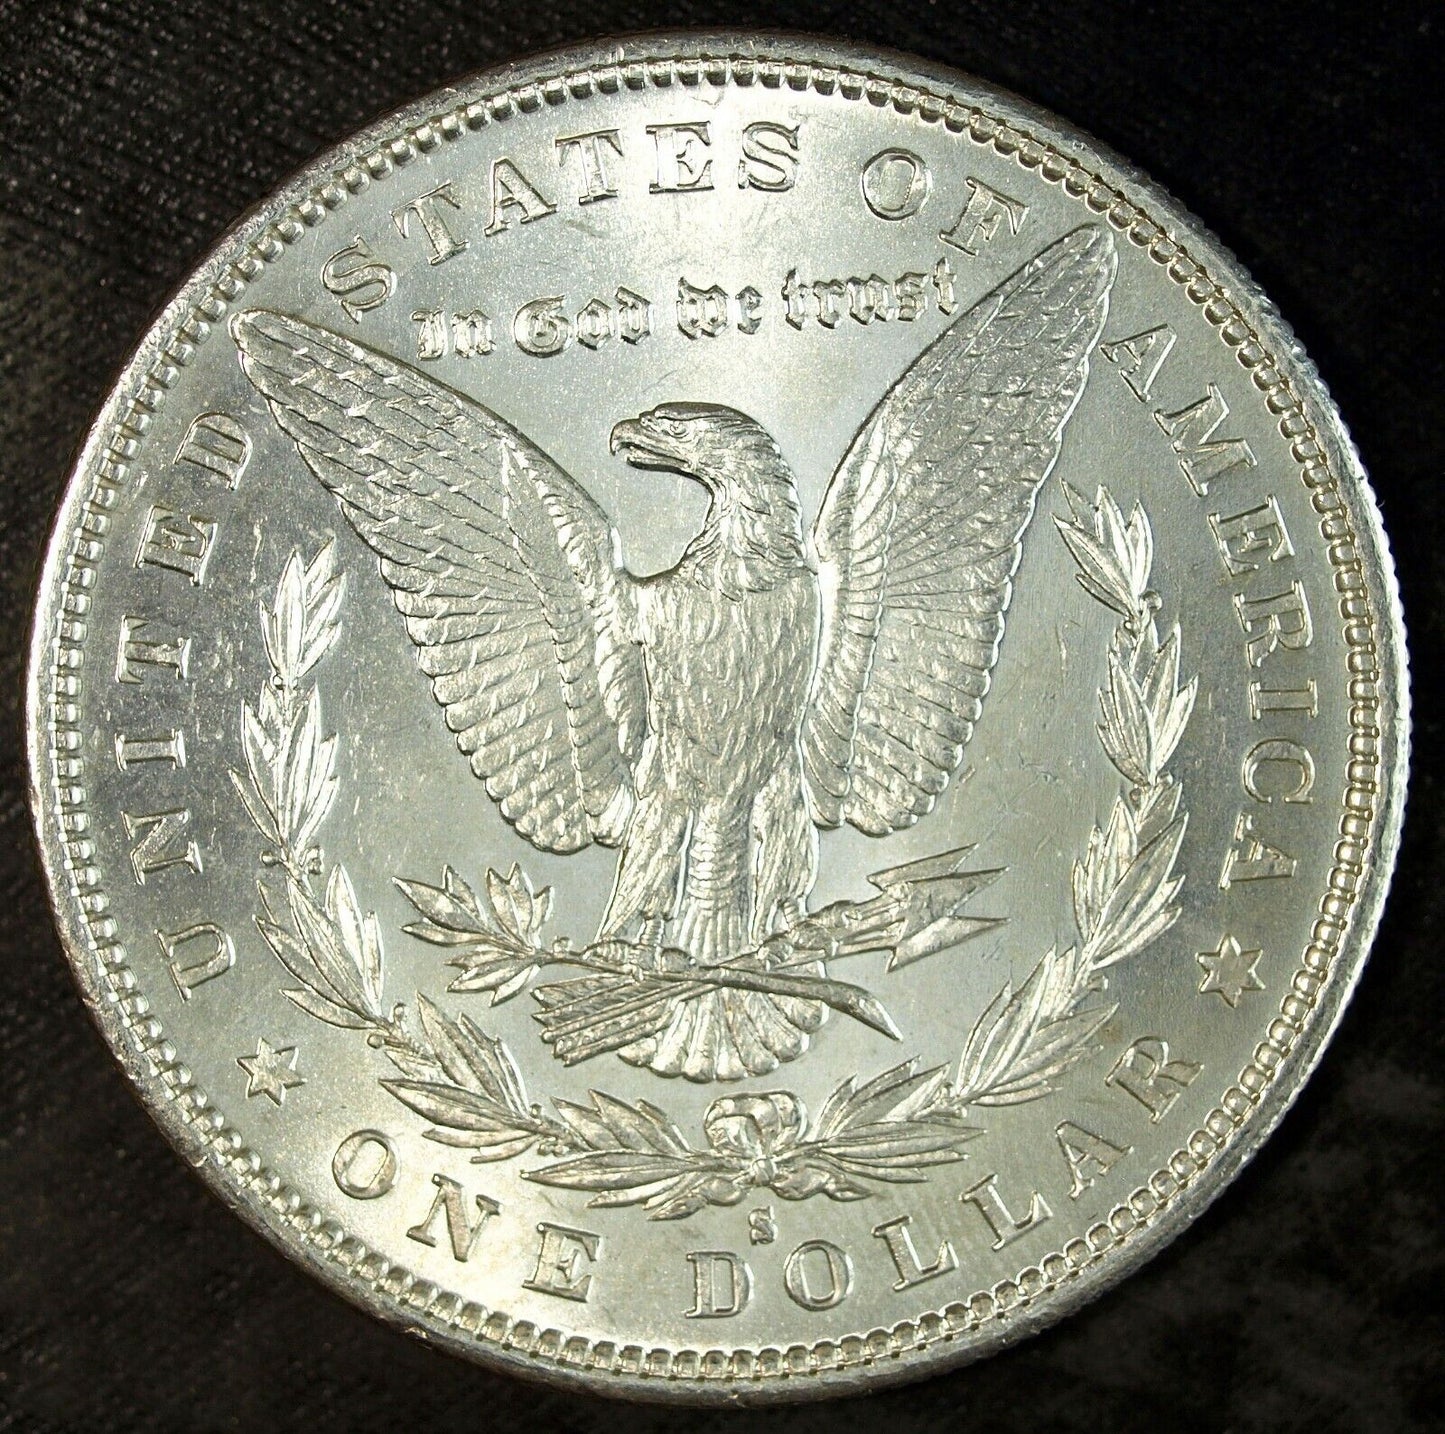 1879 S Morgan Silver Dollar ☆☆ Brilliant UnCirculated ☆☆ Great For Sets ☆☆ 141